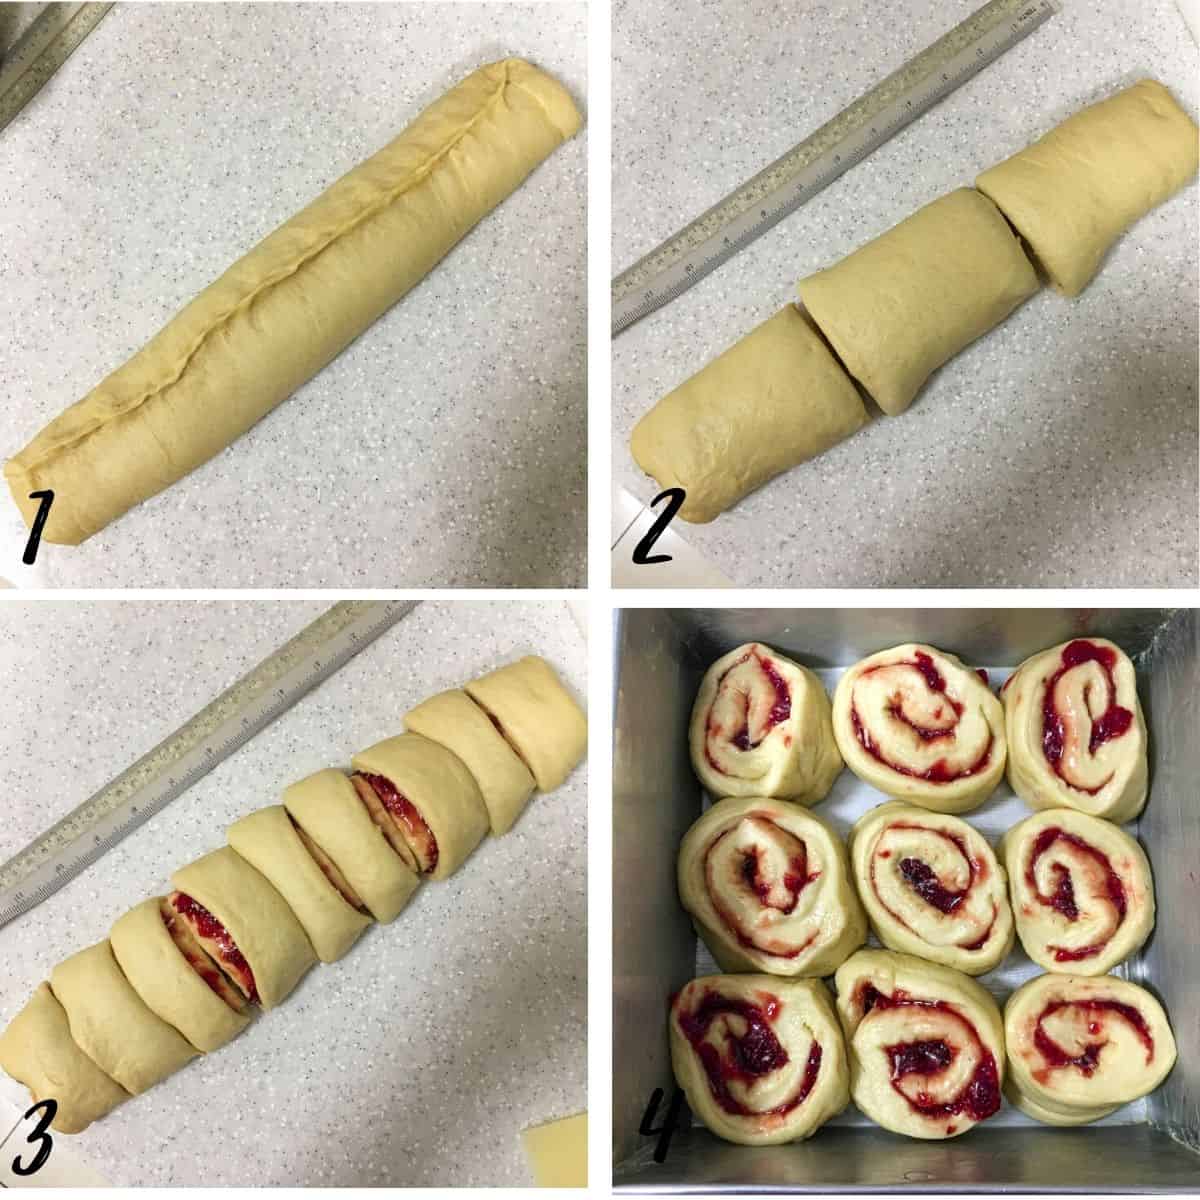 A poster of 4 images showing how to cut a cinnamon roll dough into sections and arrange in a tray